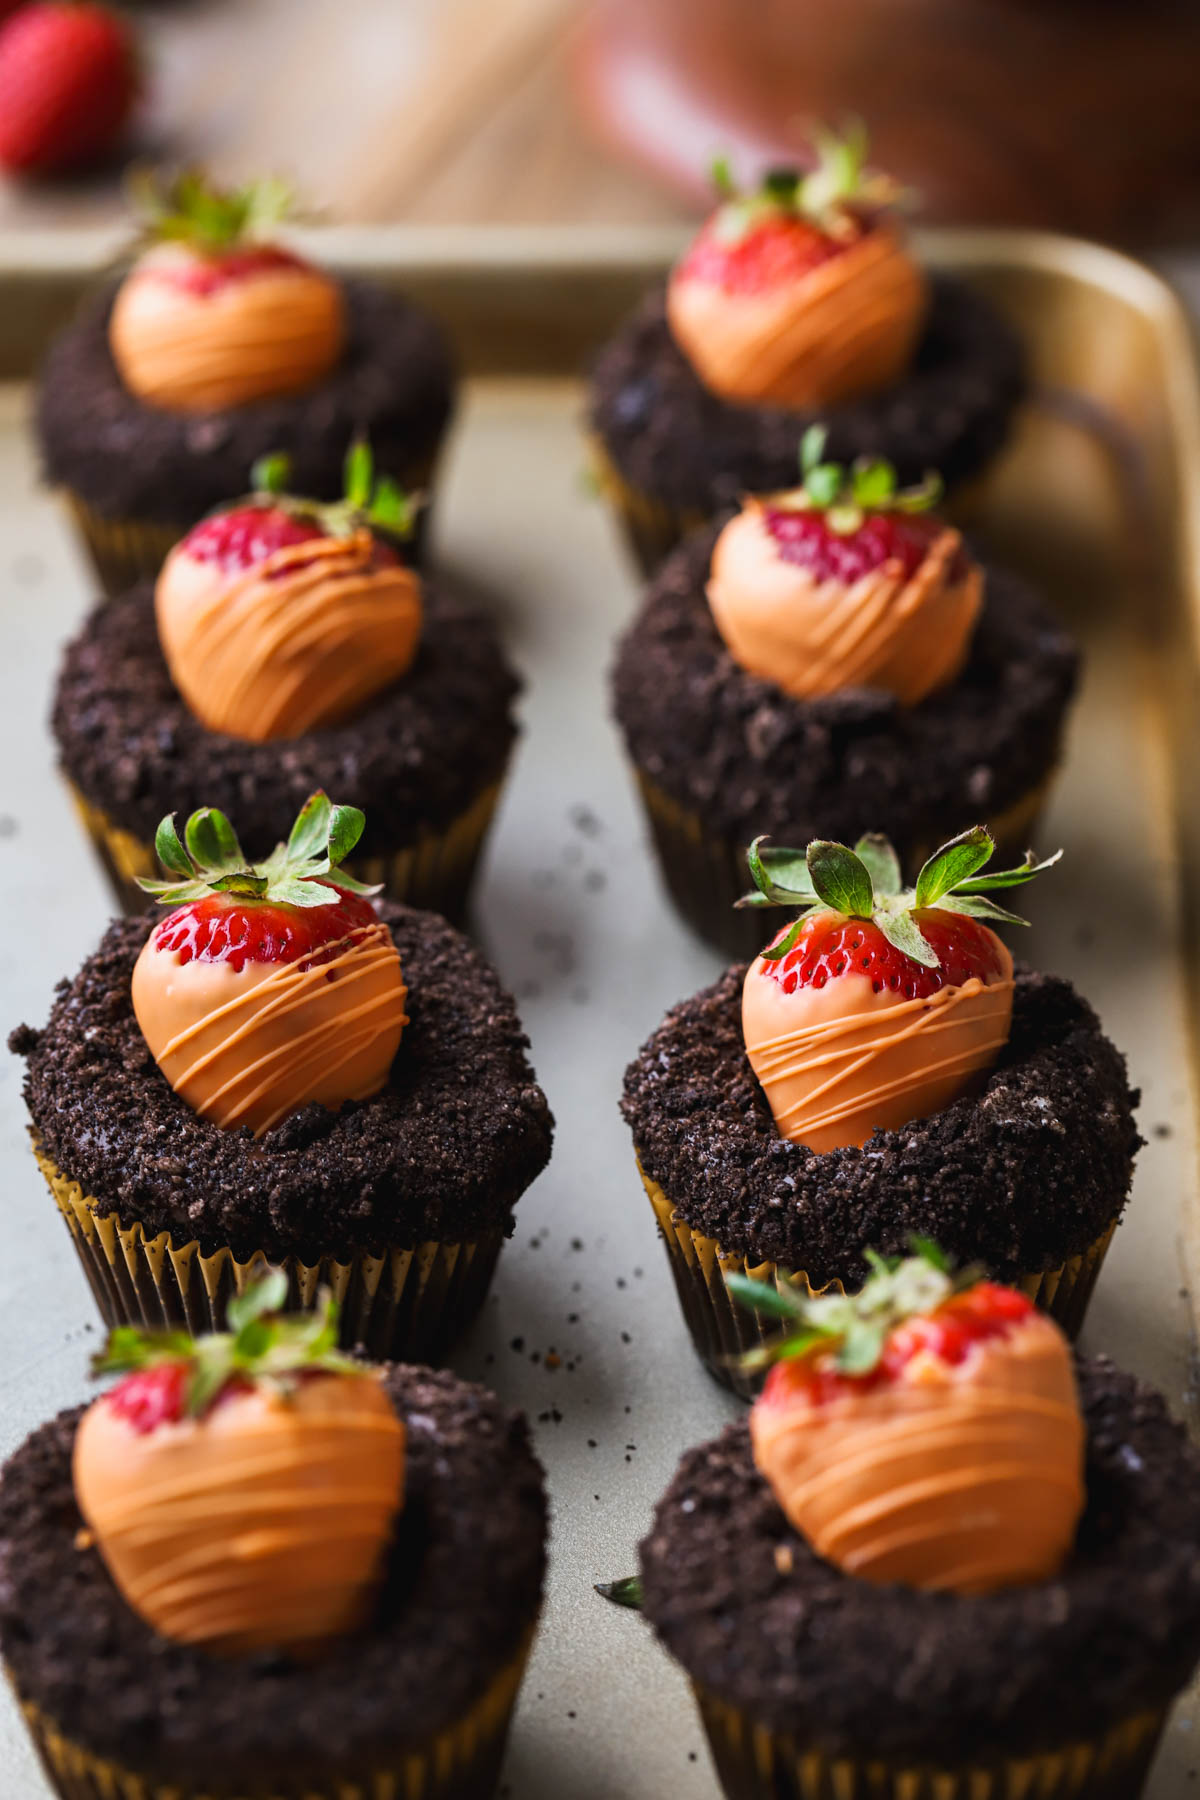 Chocolate fudge cupcakes with oreo cookie "dirt" and fresh strawberries dipped in orange candy melts.  